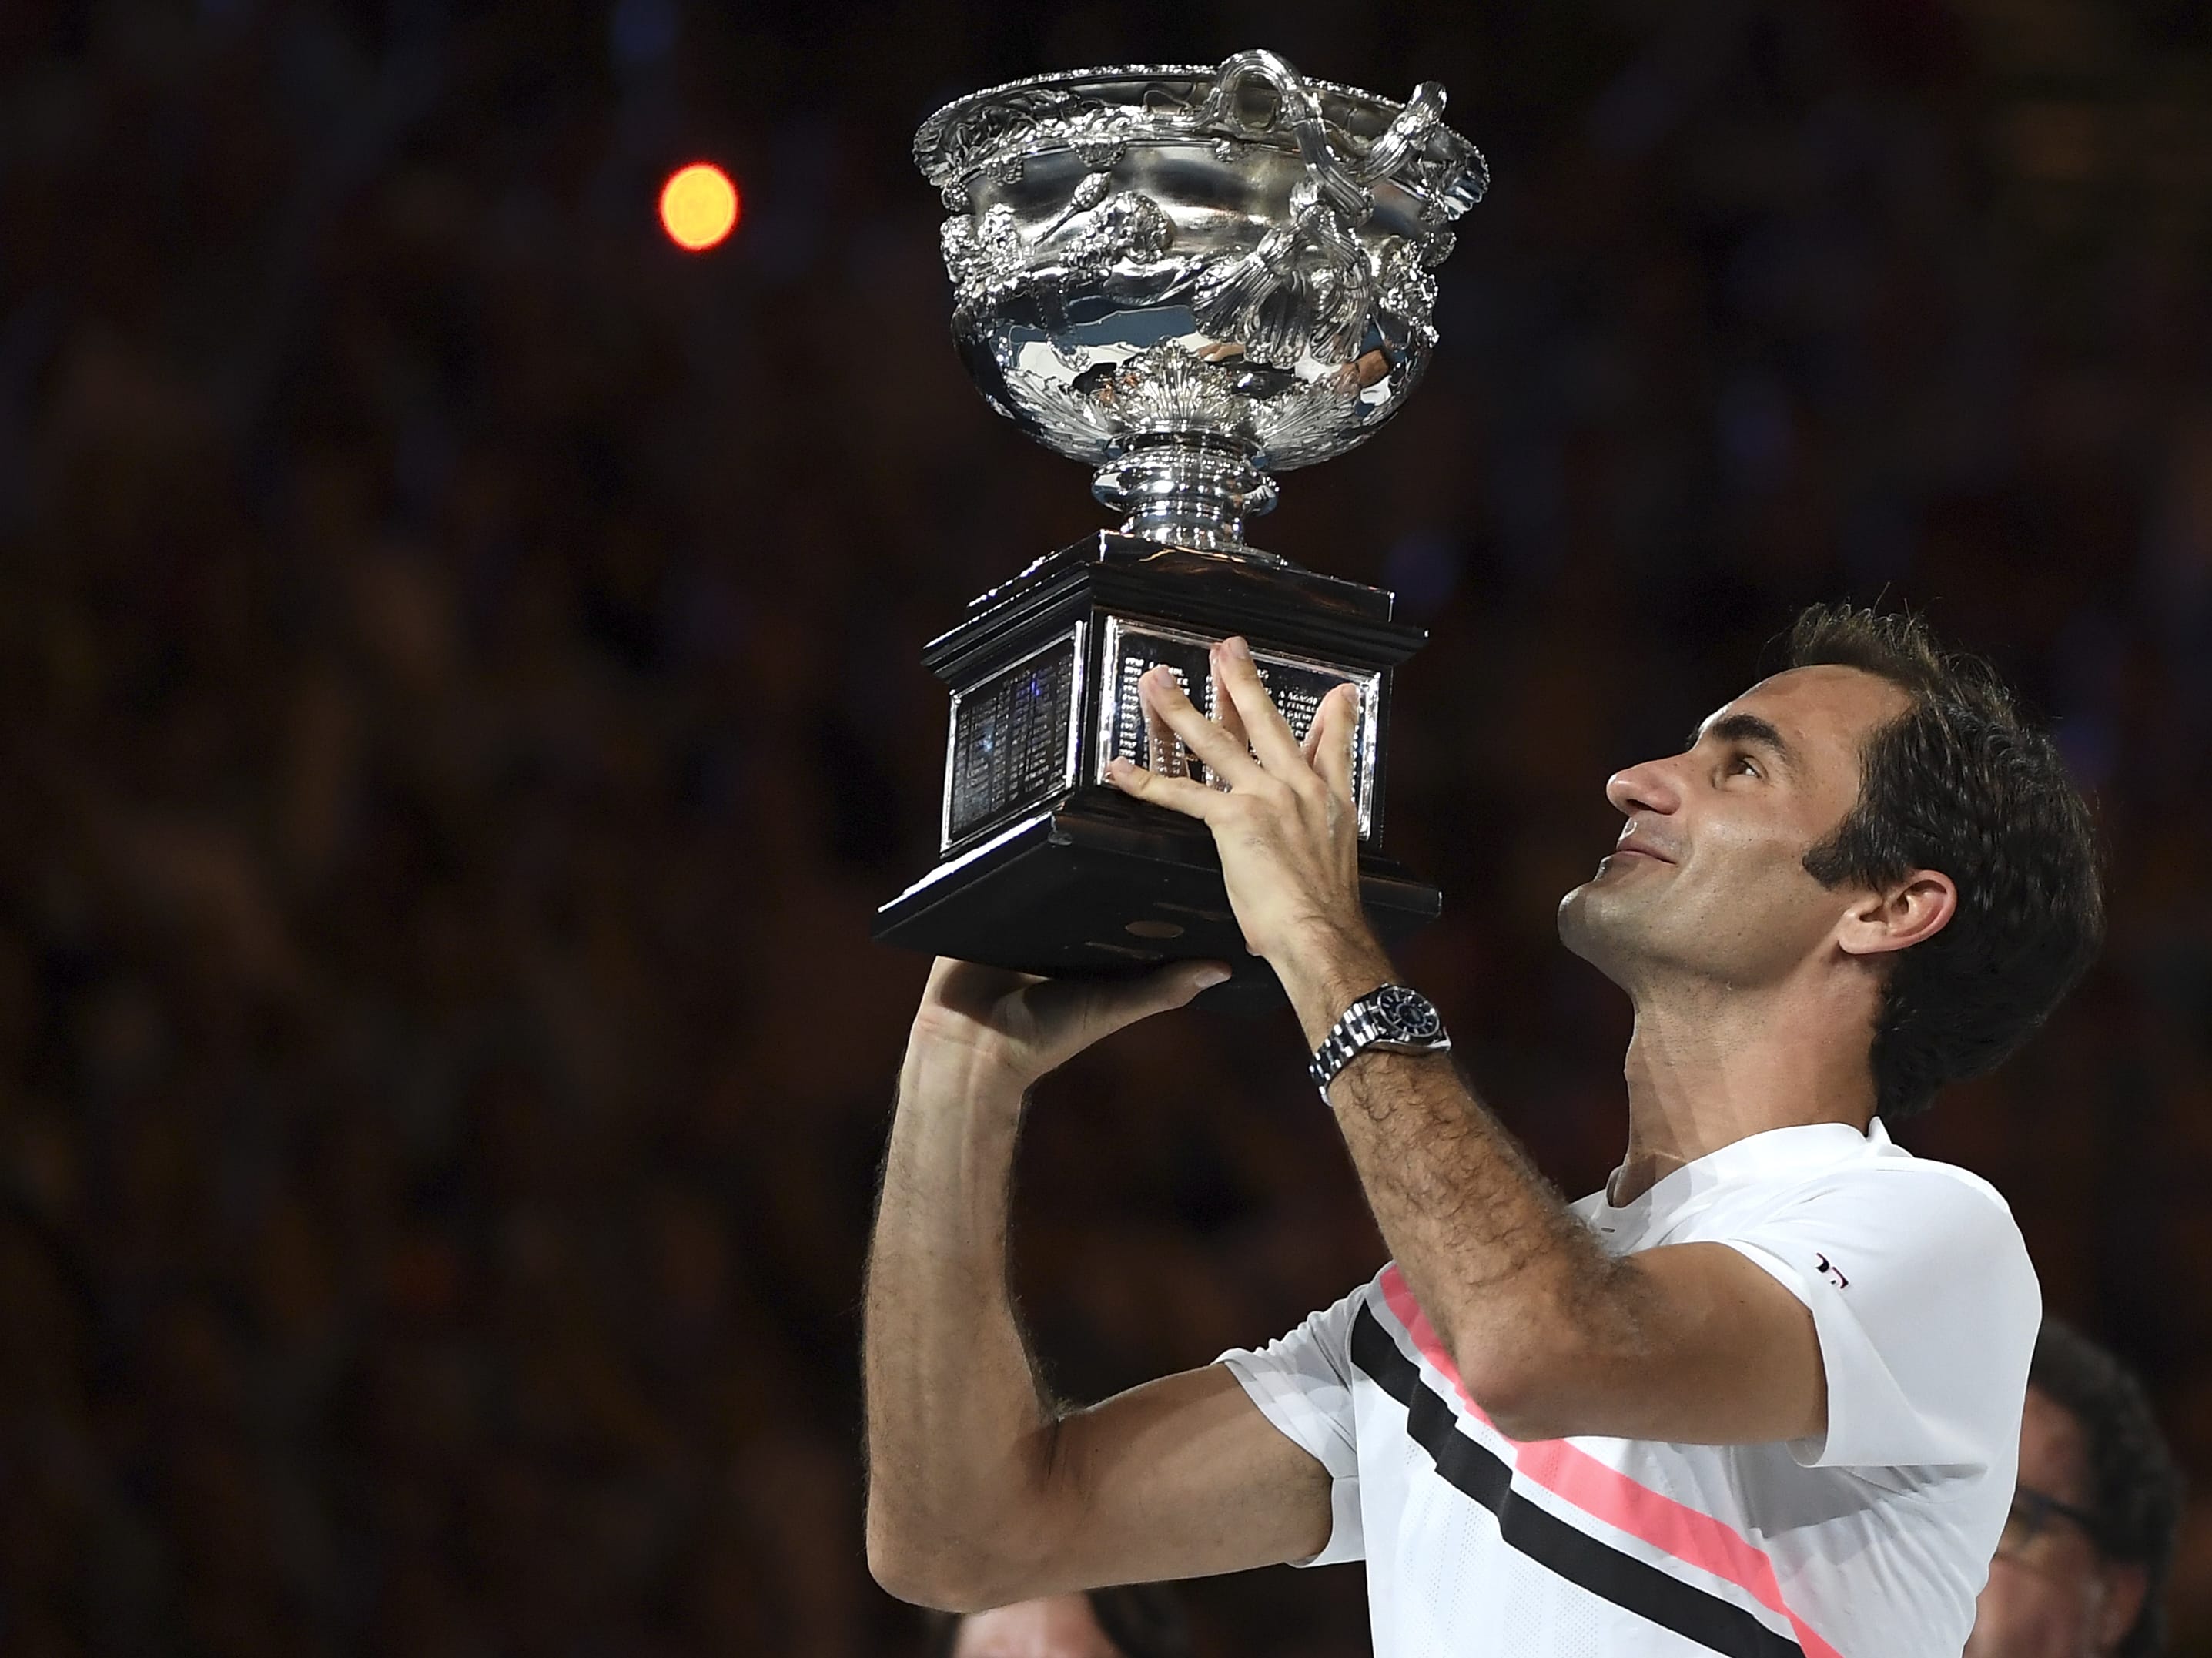 Switzerland's Roger Federer holds his trophy aloft after defeating Croatia's Marin Cilic during the men's singles final at the Australian Open tennis championships in Melbourne, Australia, Sunday, Jan. 28, 2018.